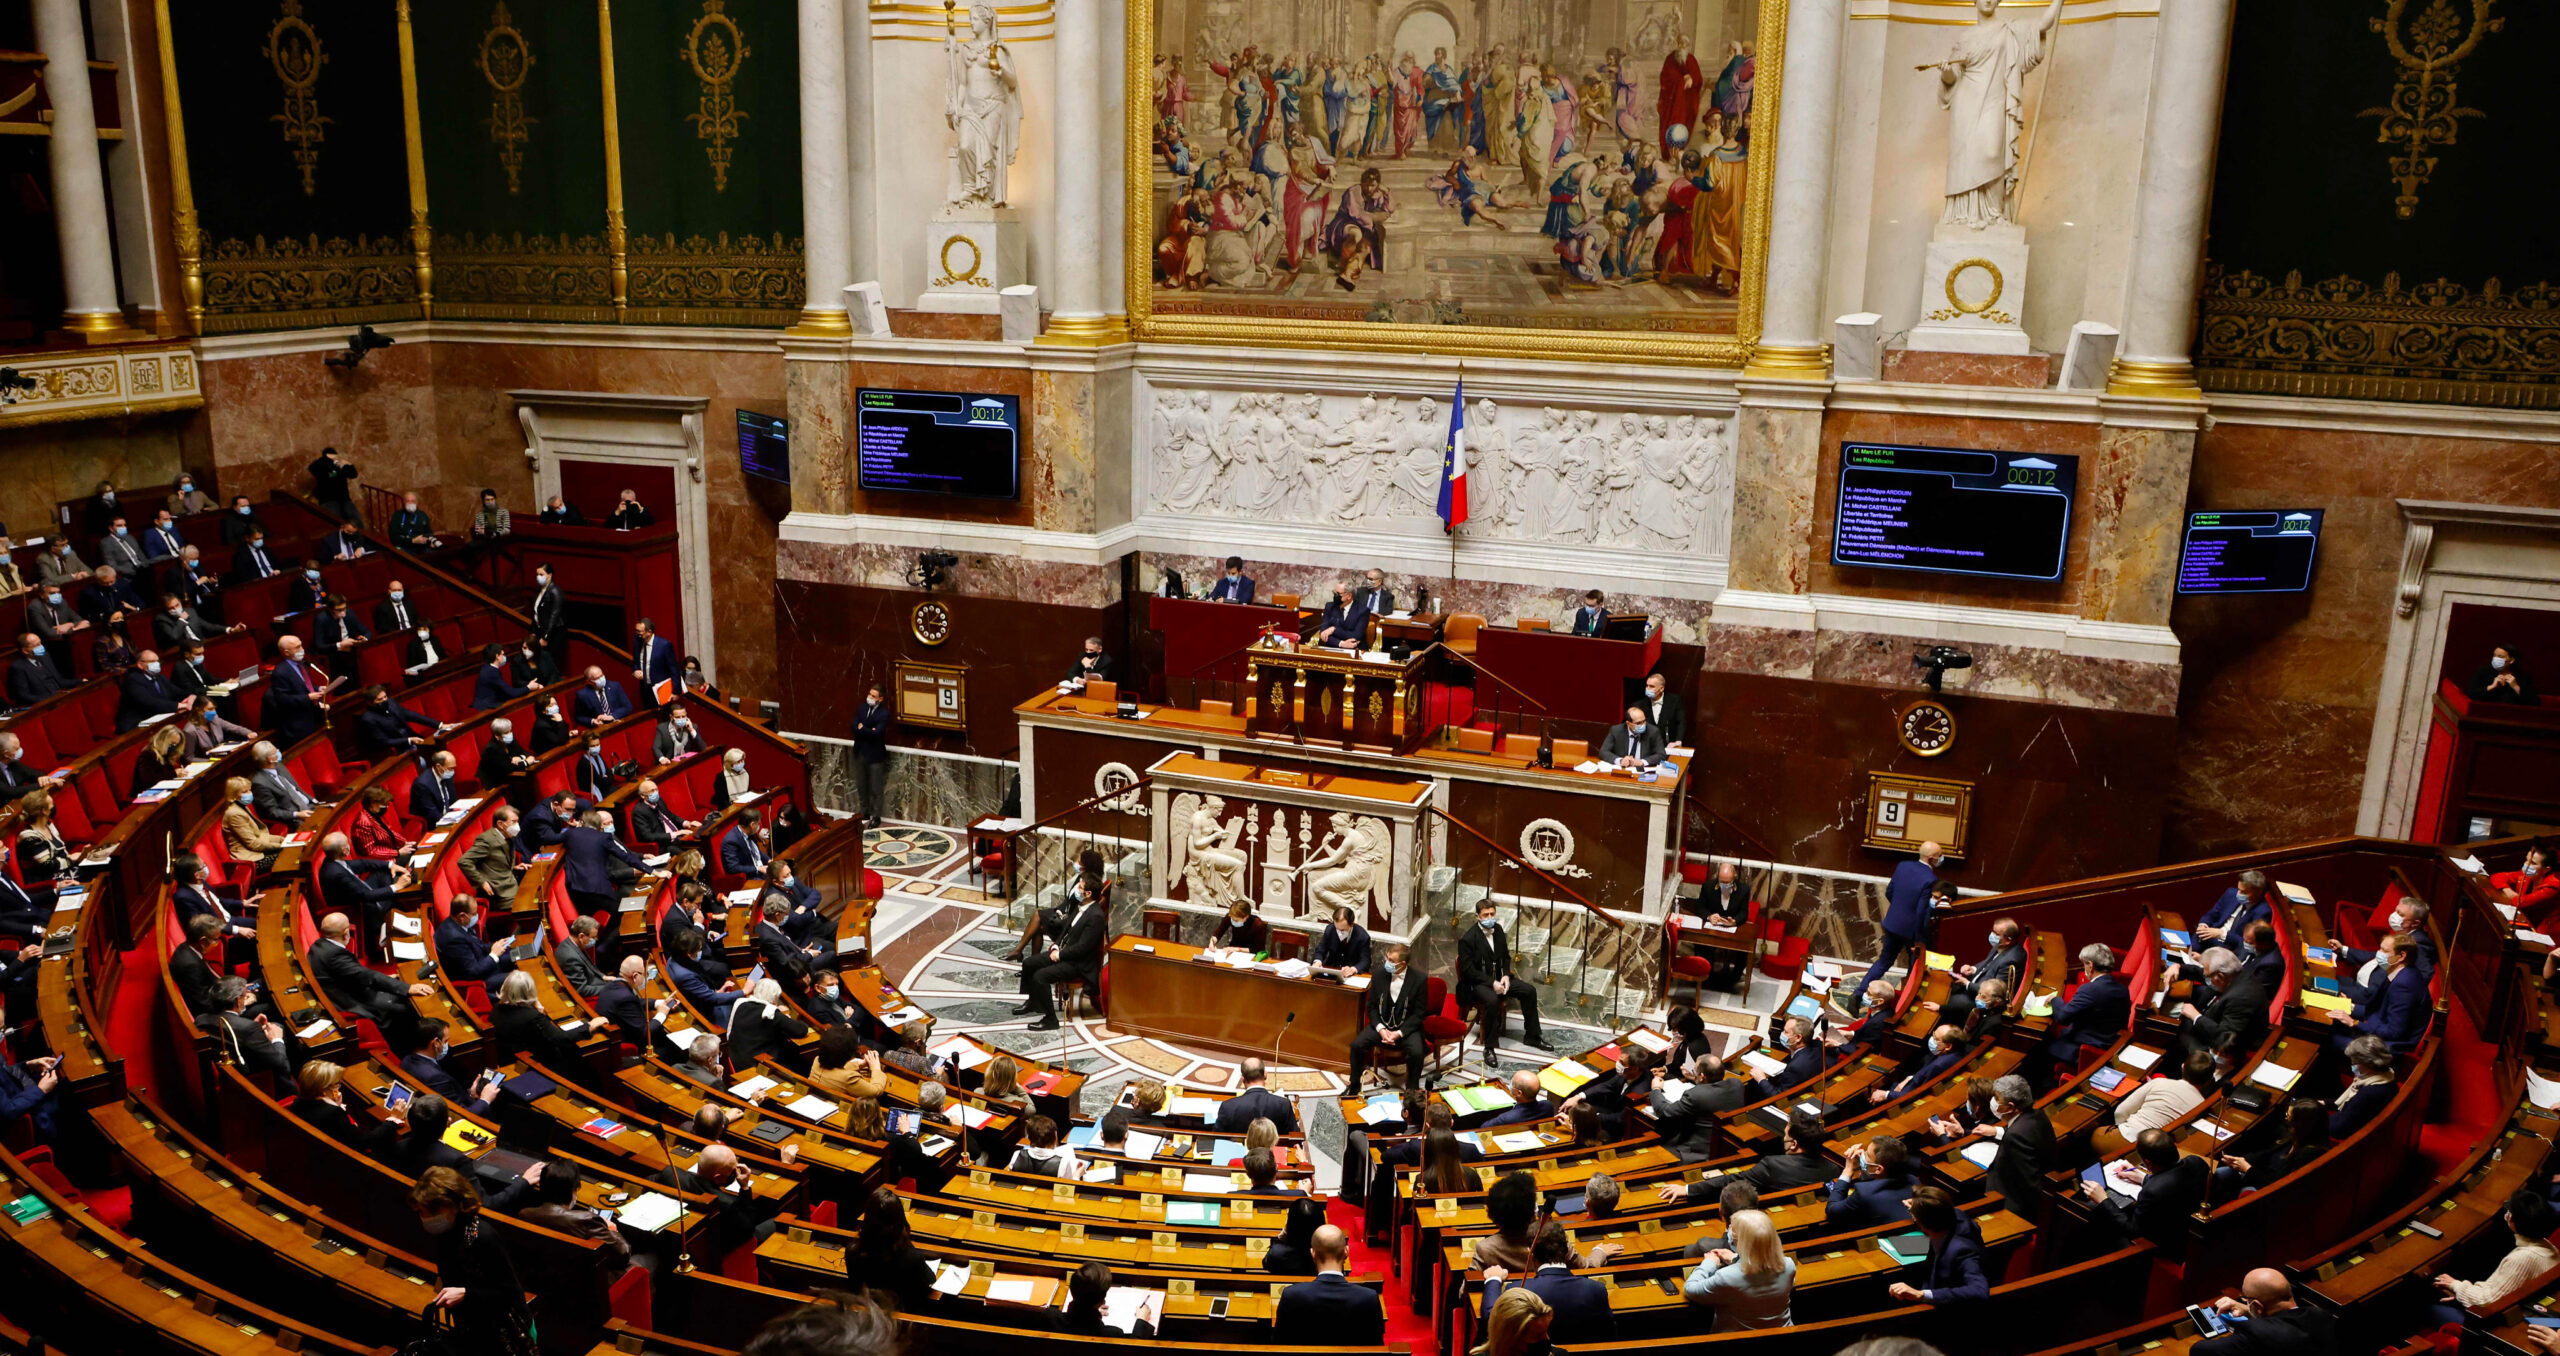 The National Assembly of France